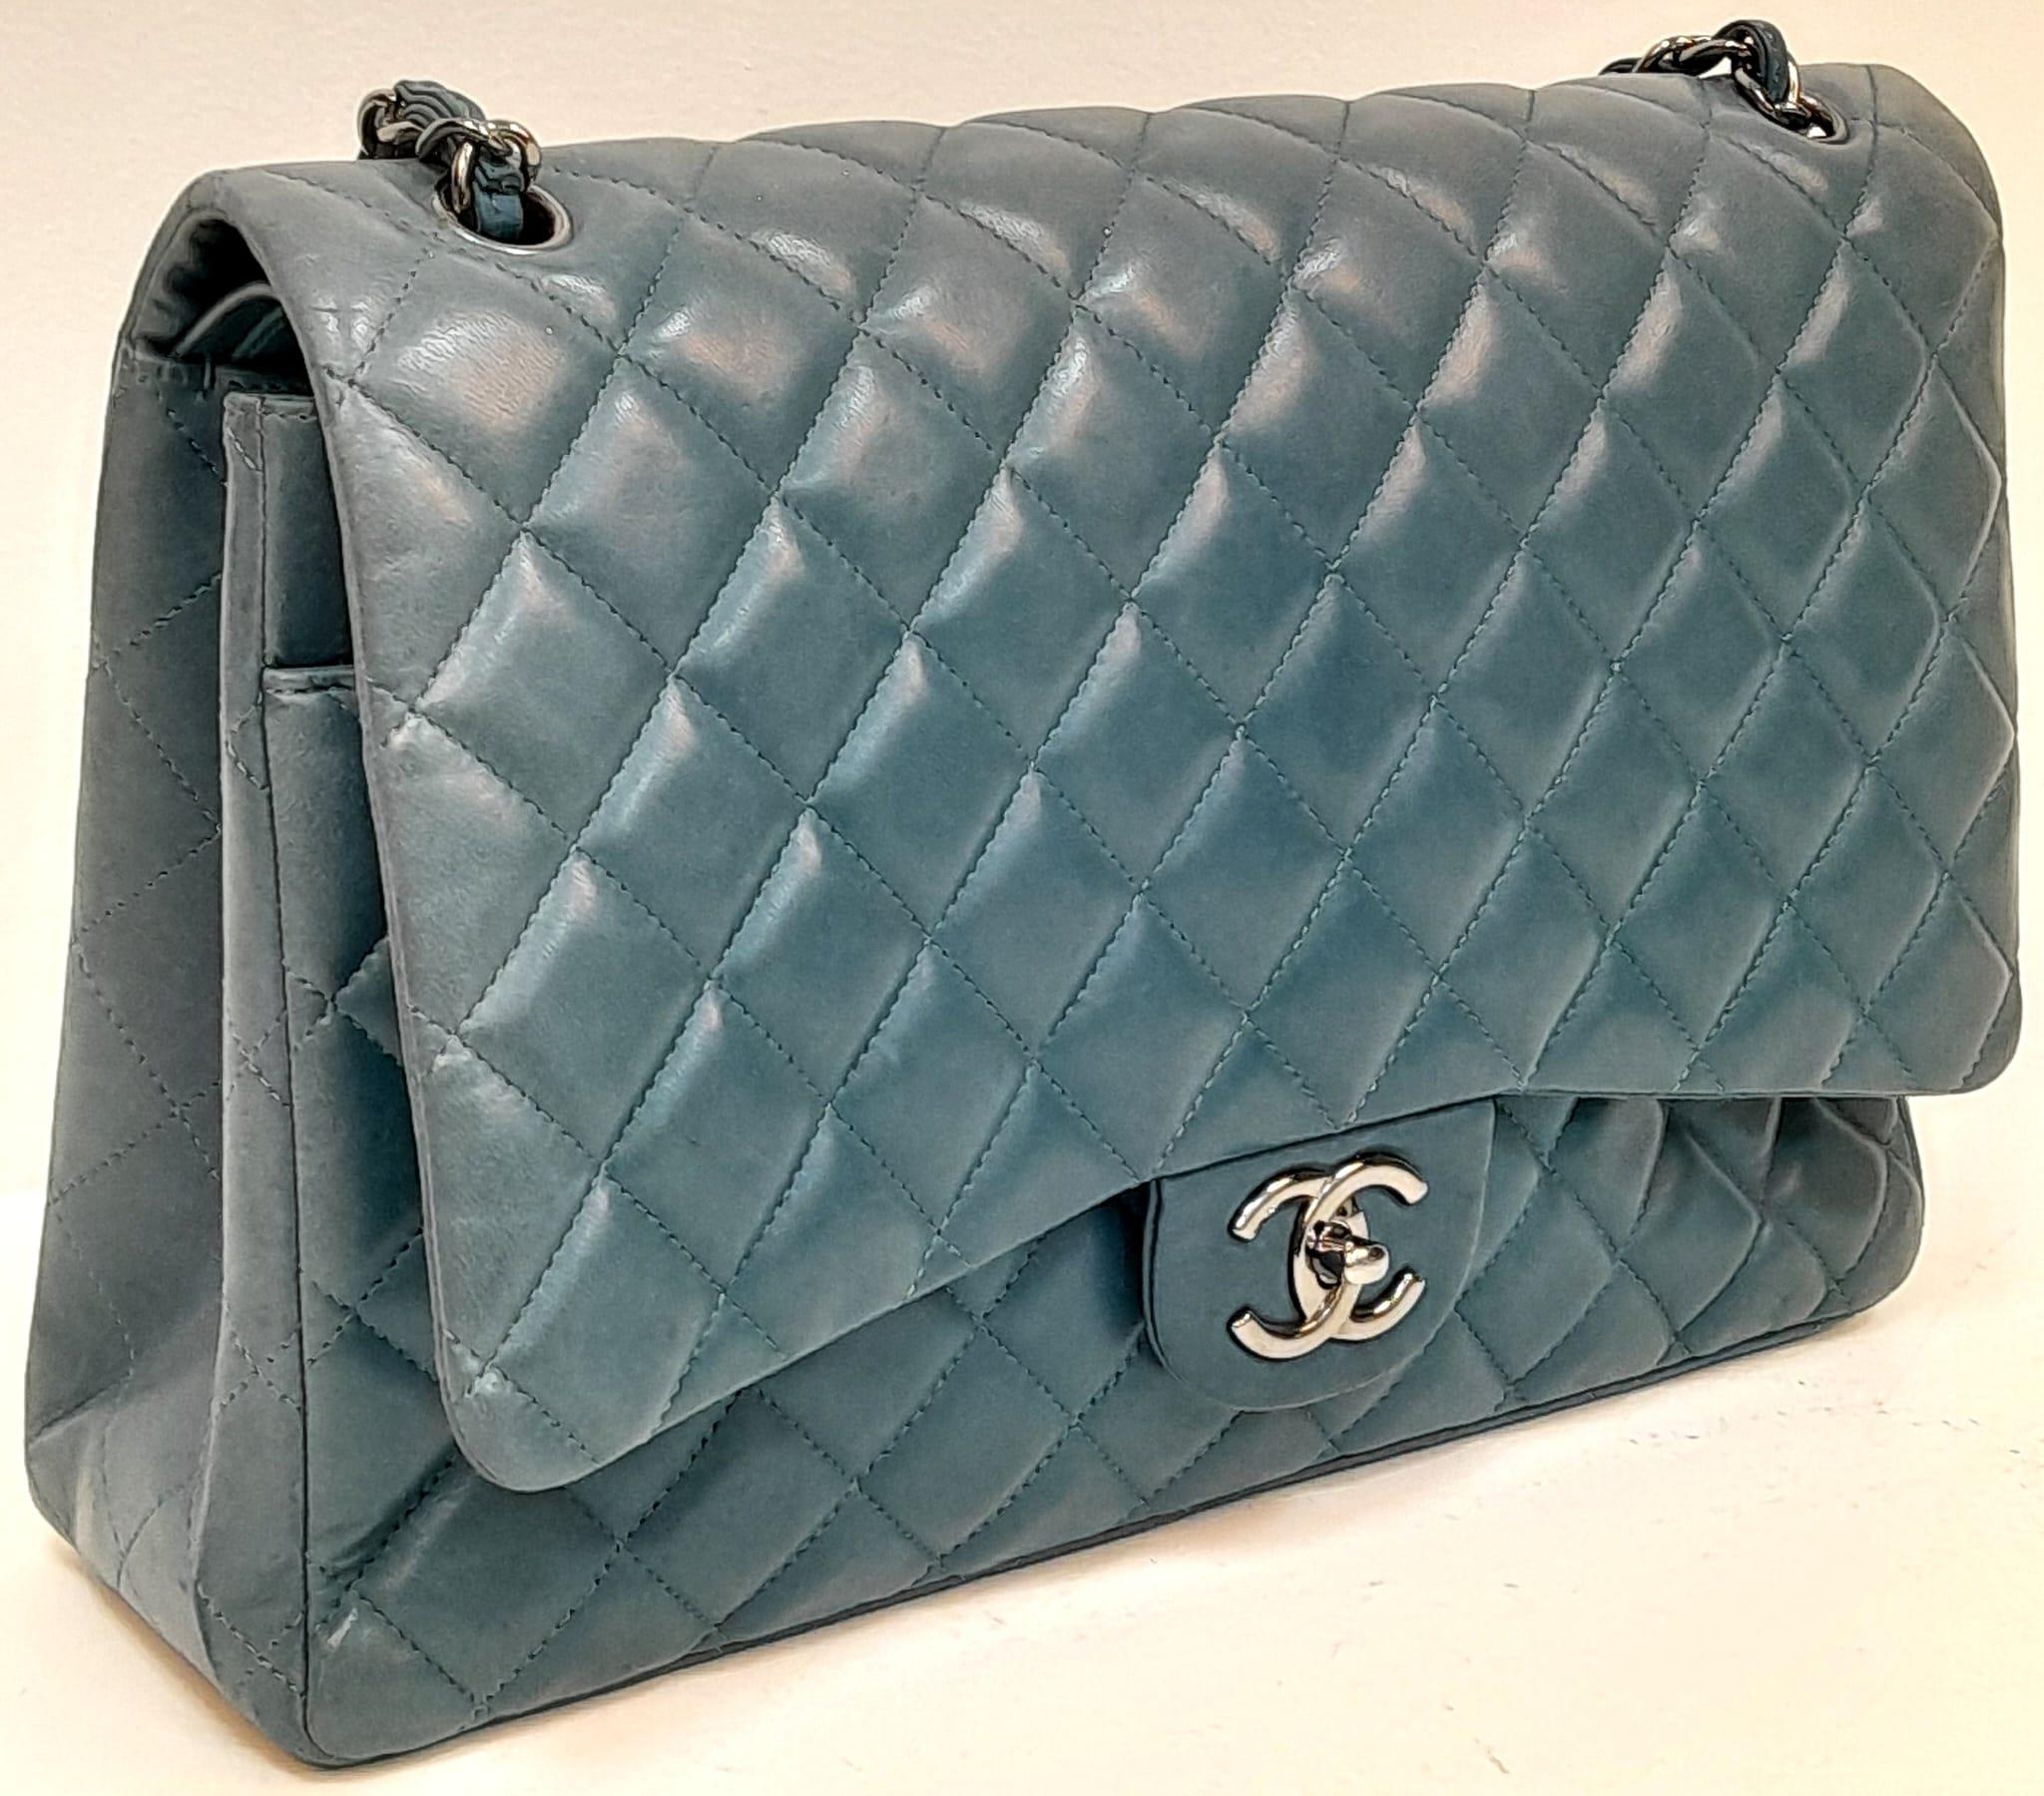 A Chanel Teal Jumbo Classic Double Flap Bag. Quilted leather exterior with silver-toned hardware, - Image 6 of 14